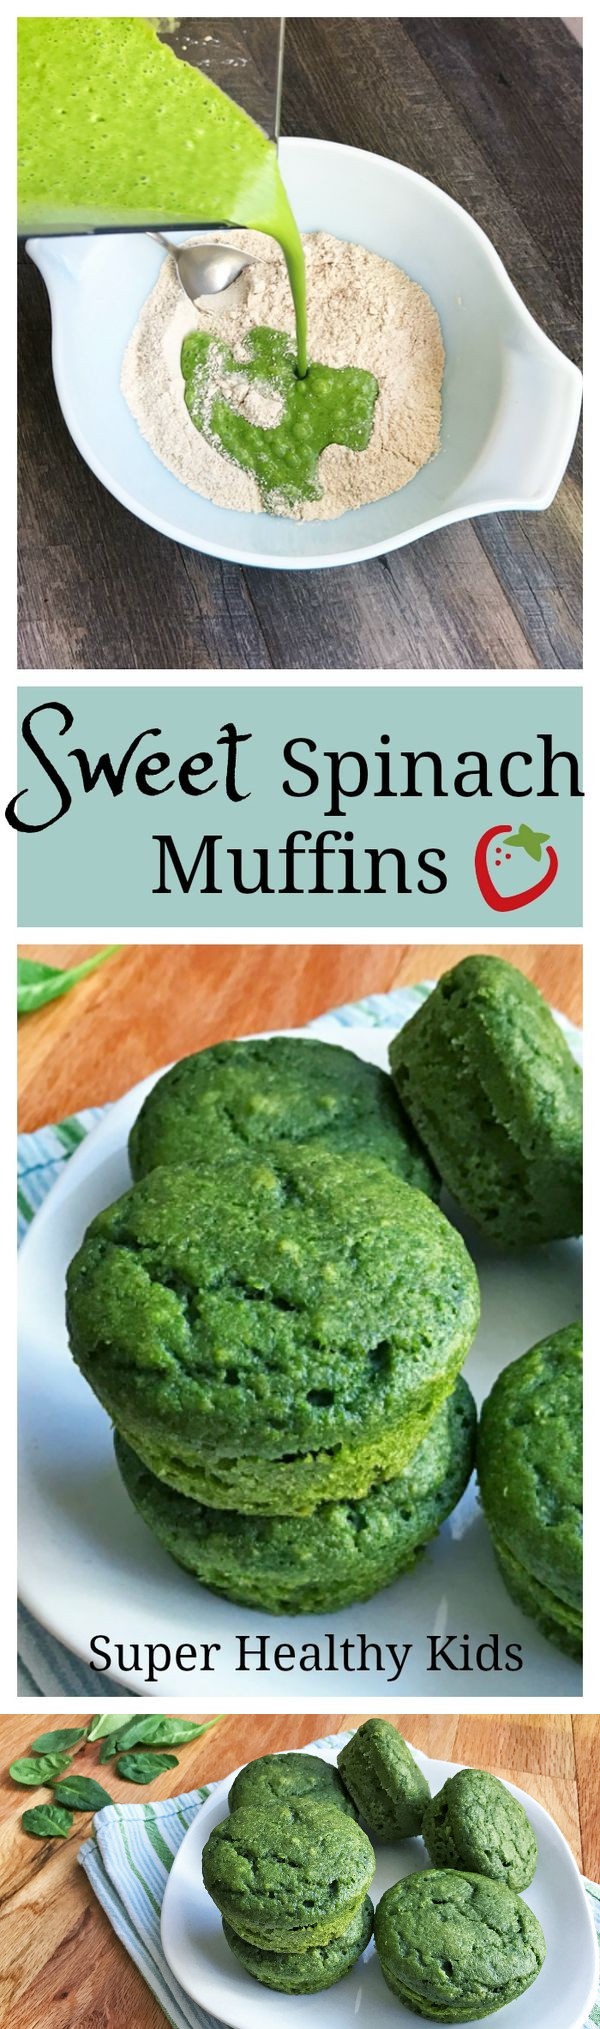 Sweet Spinach Muffins